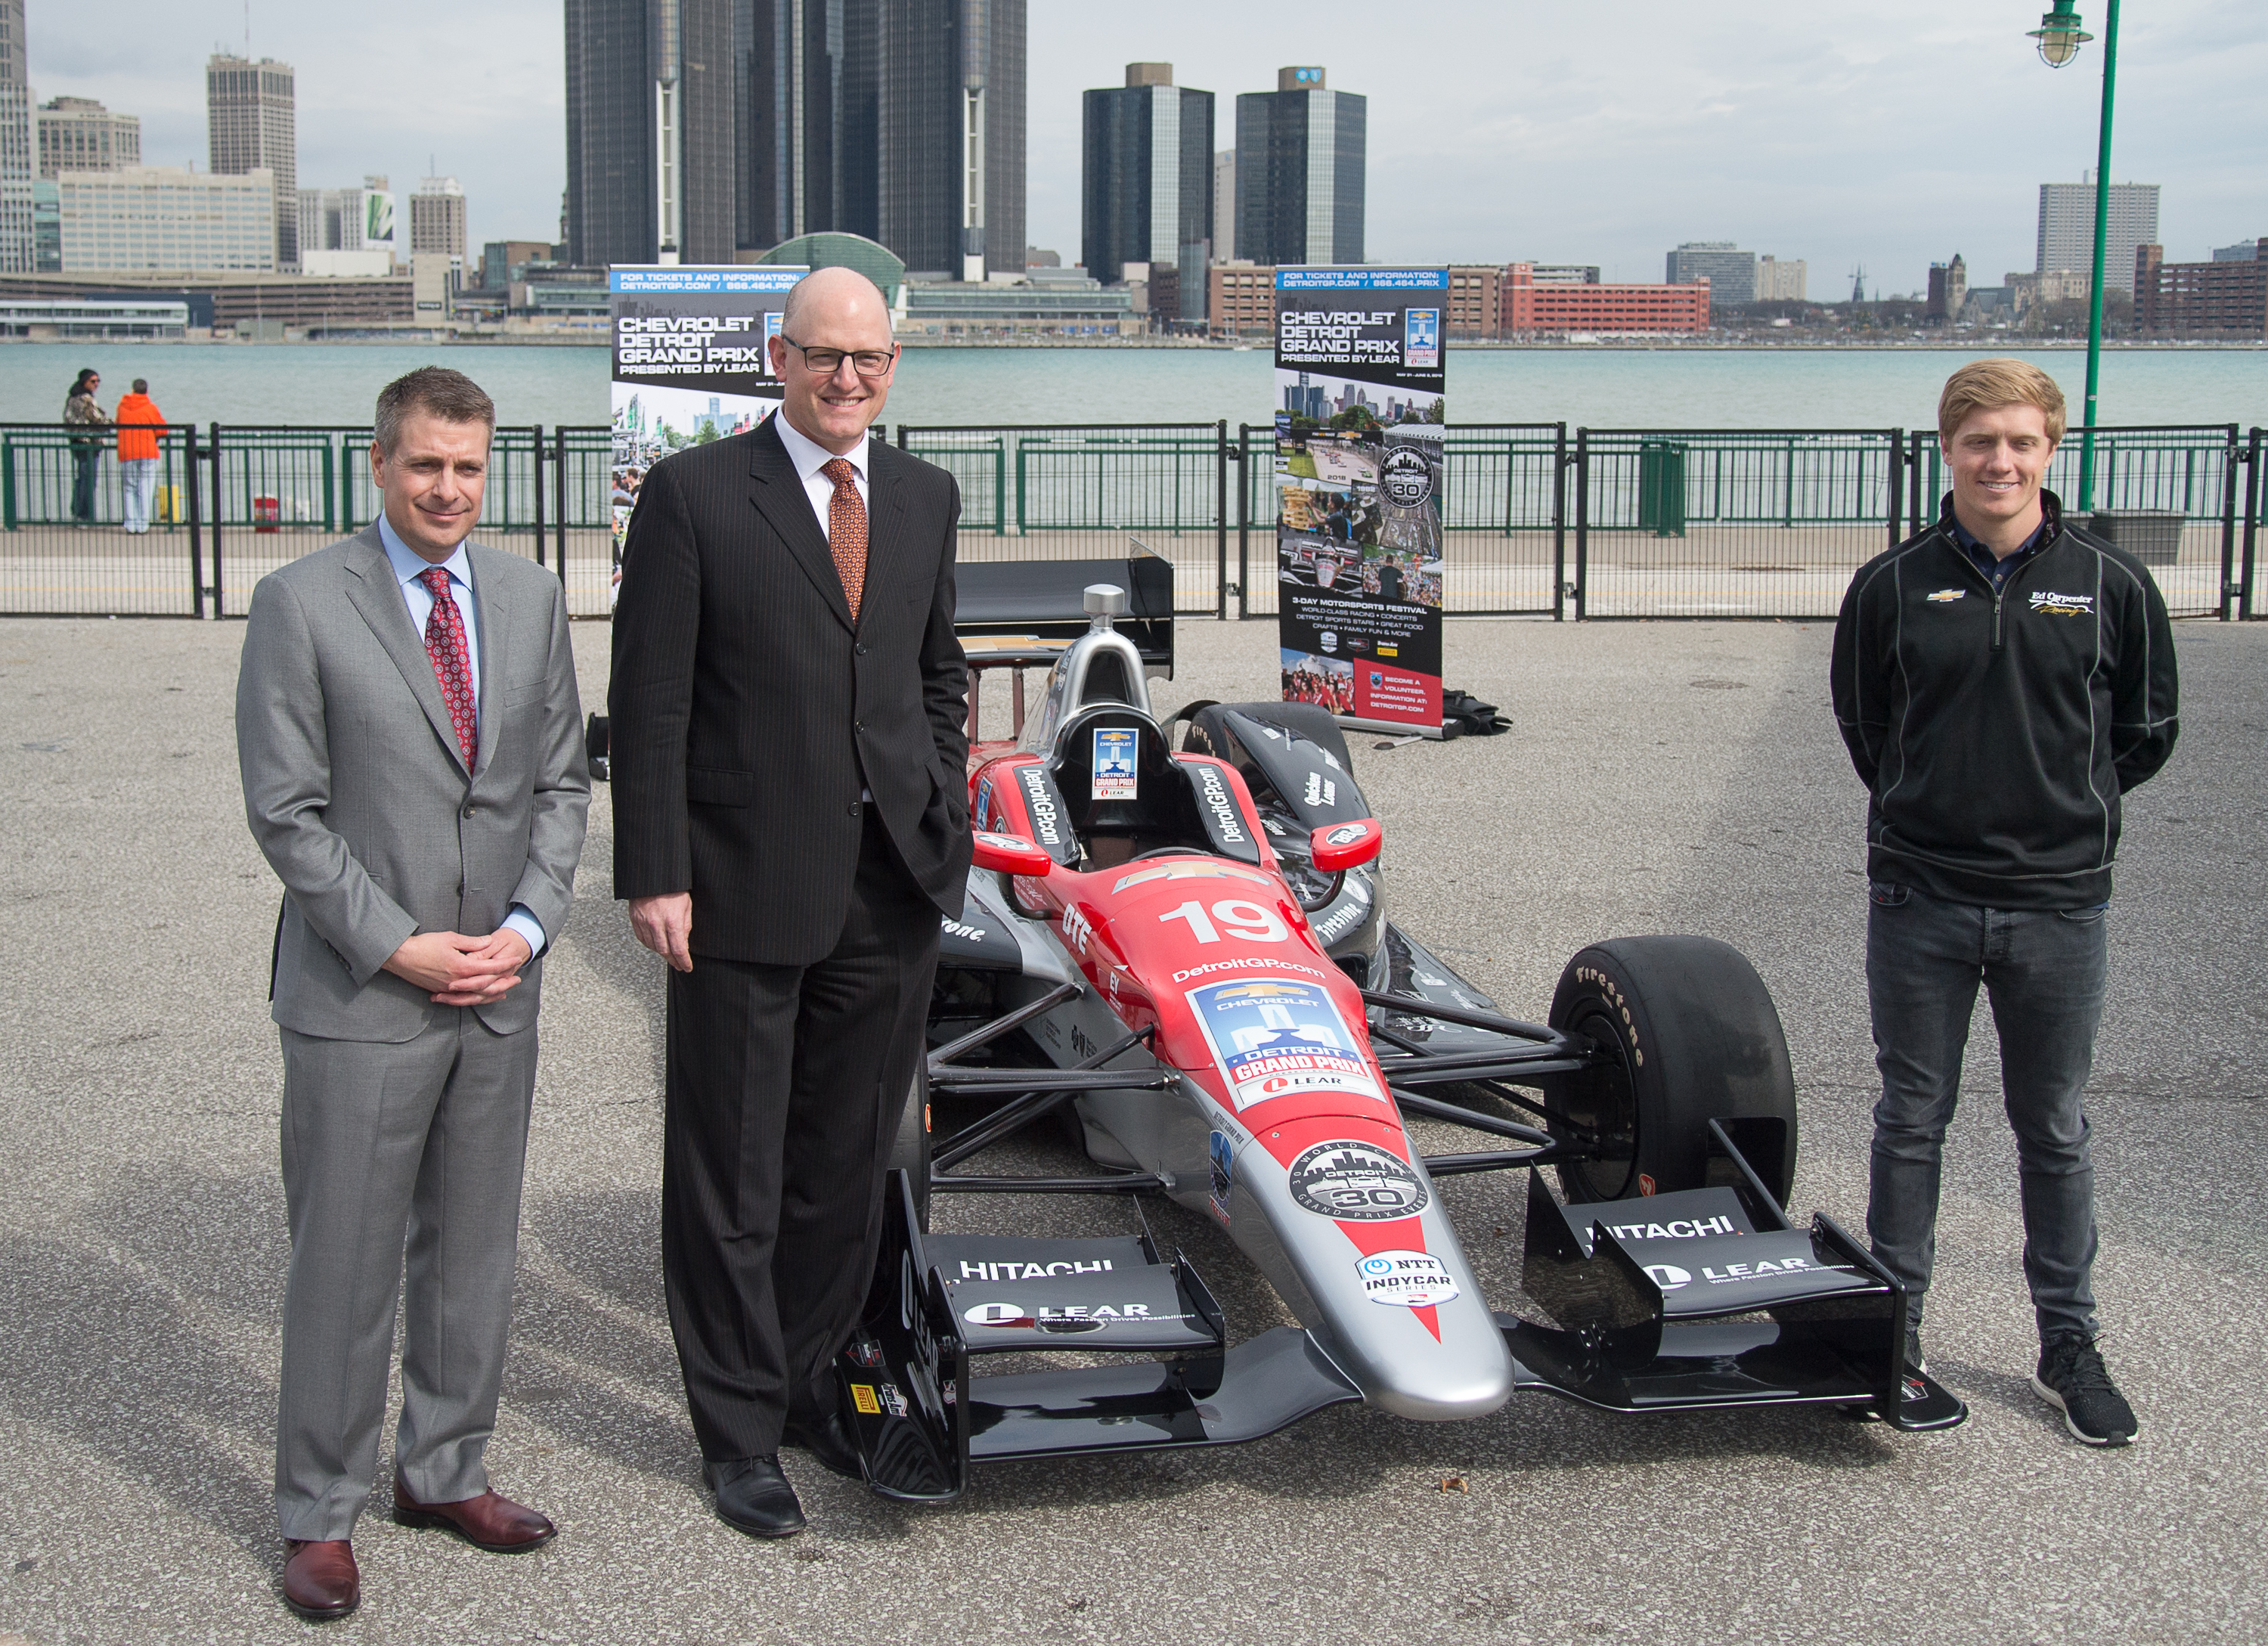 Chevrolet Detroit Grand Prix Presented by Lear and the City of Windsor Renew Partnership and Canadian Ticket Package